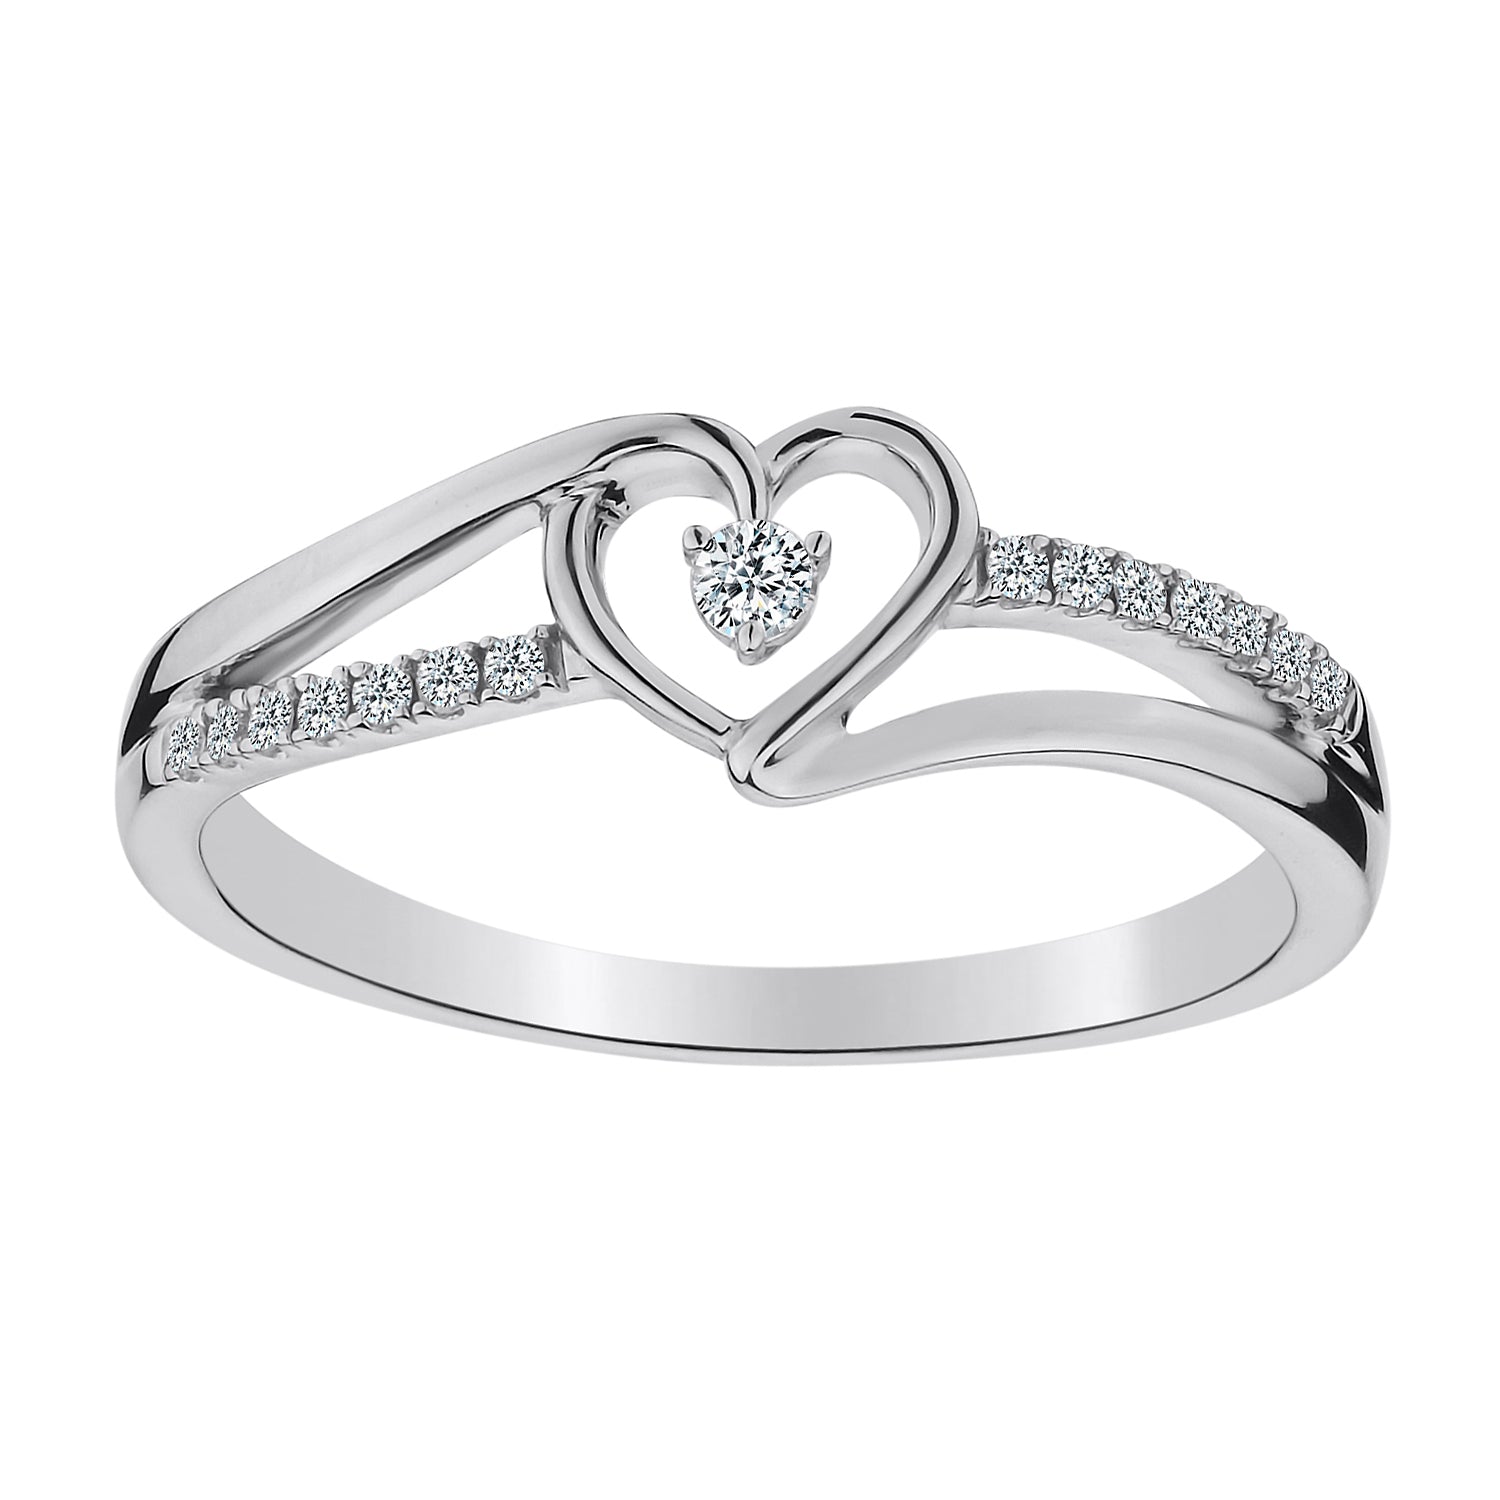 .10 CARAT DIAMOND HEART RING, 10kt WHITE GOLD. Fashion Rings - Griffin Jewellery Designs